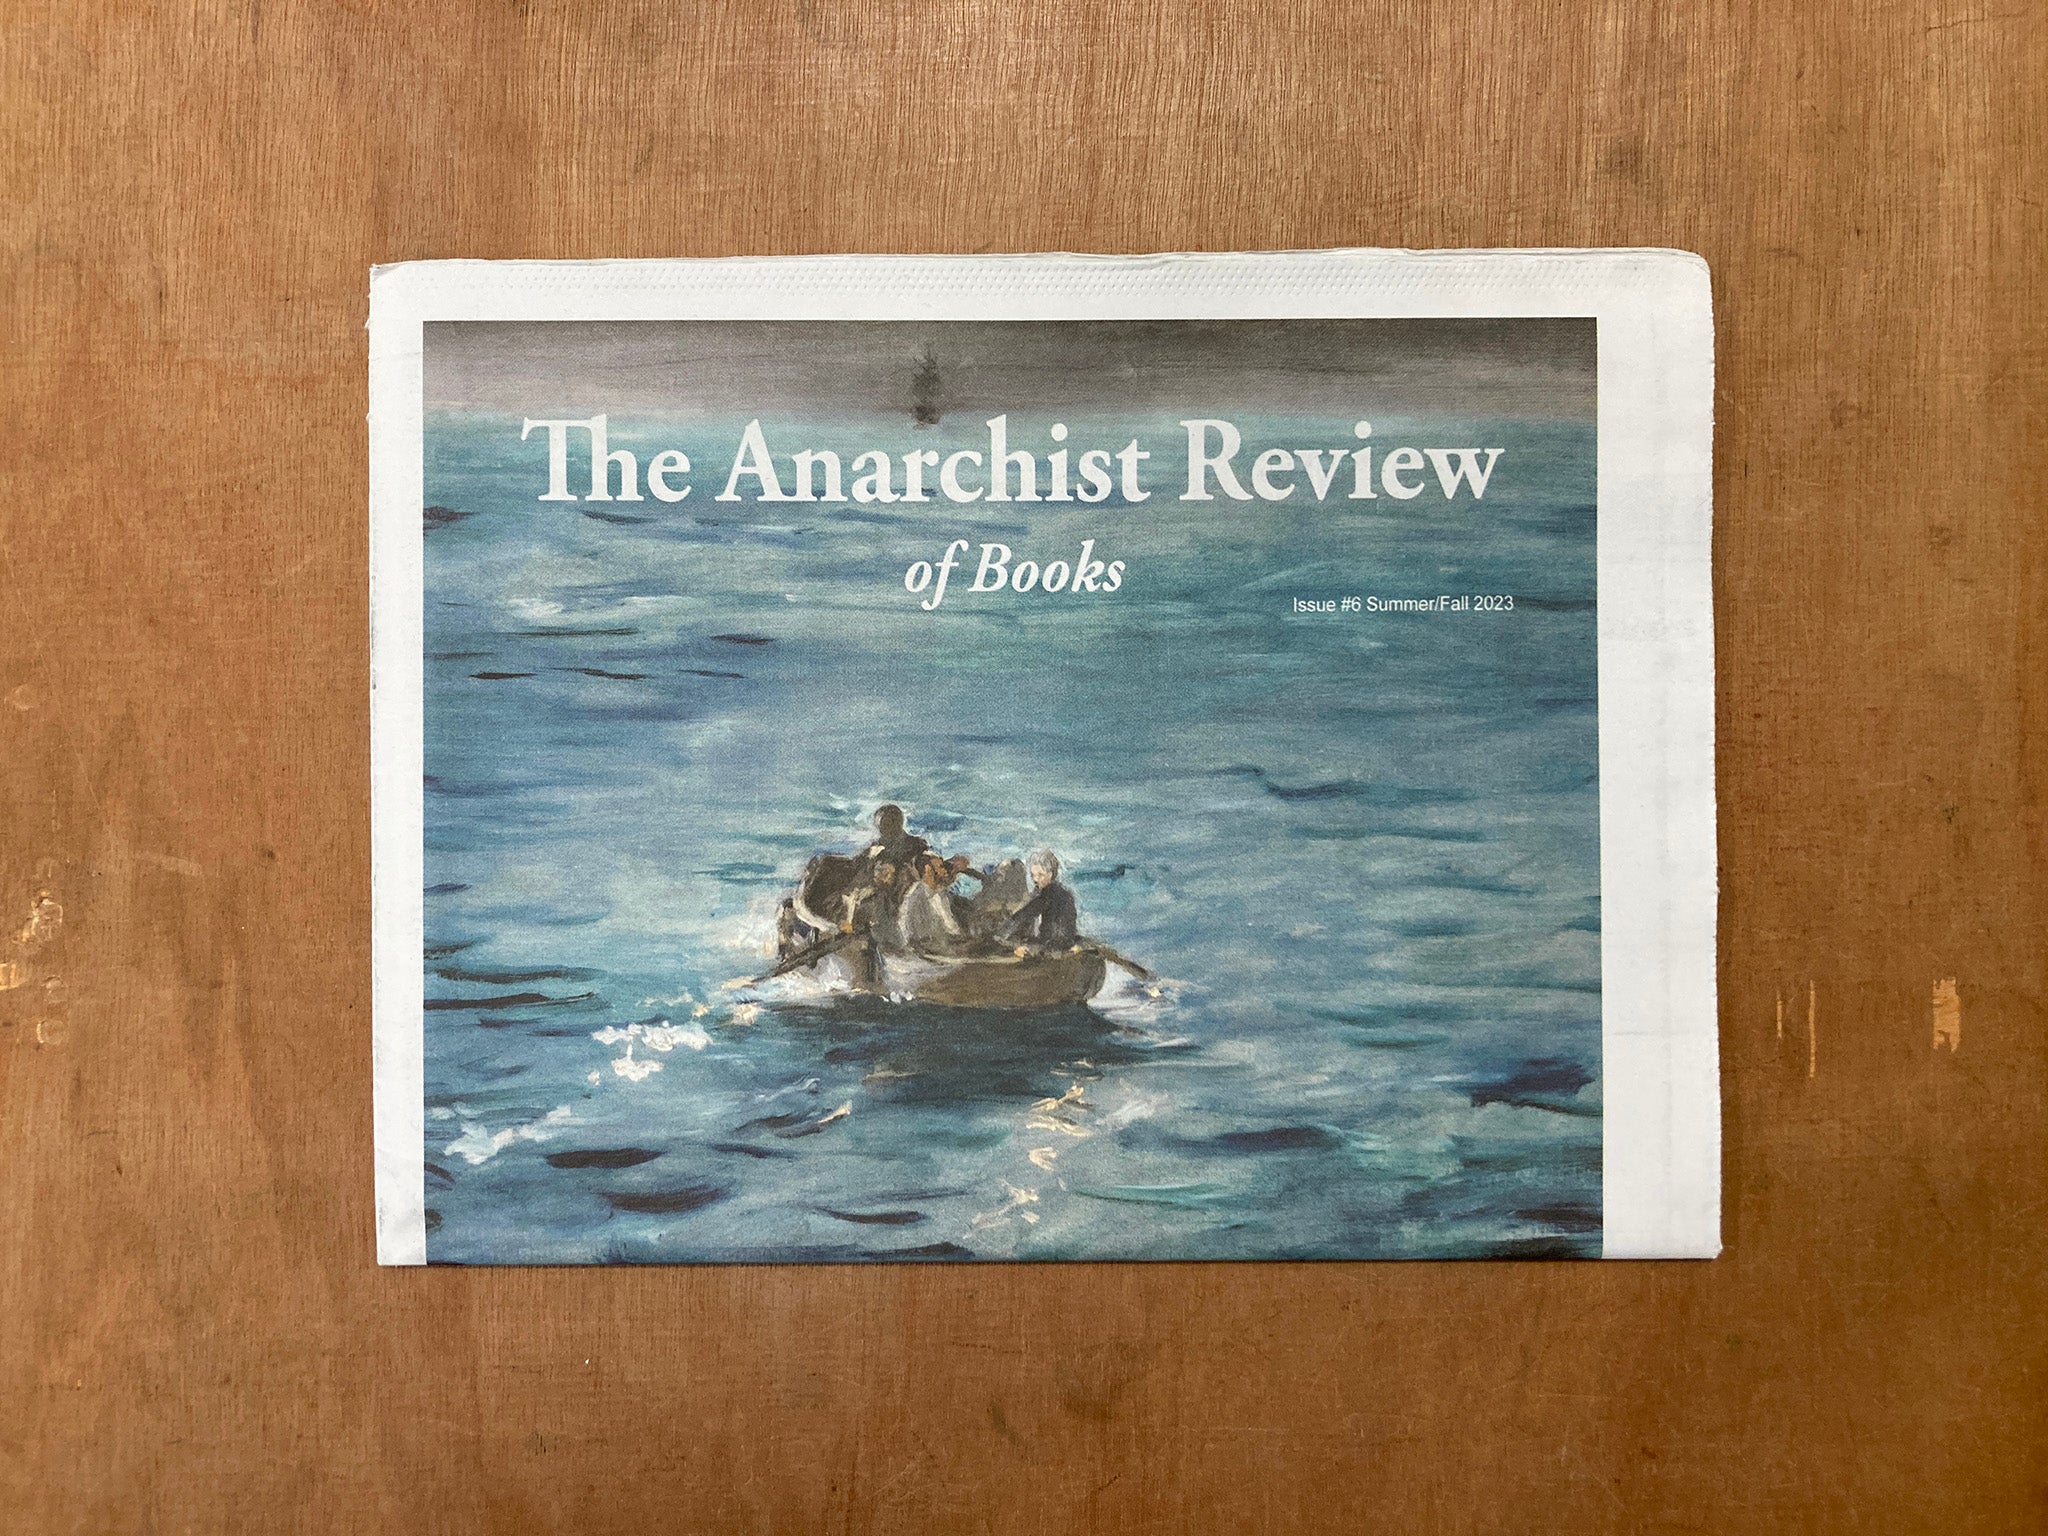 THE ANARCHIST REVIEW OF BOOKS ISSUE #6